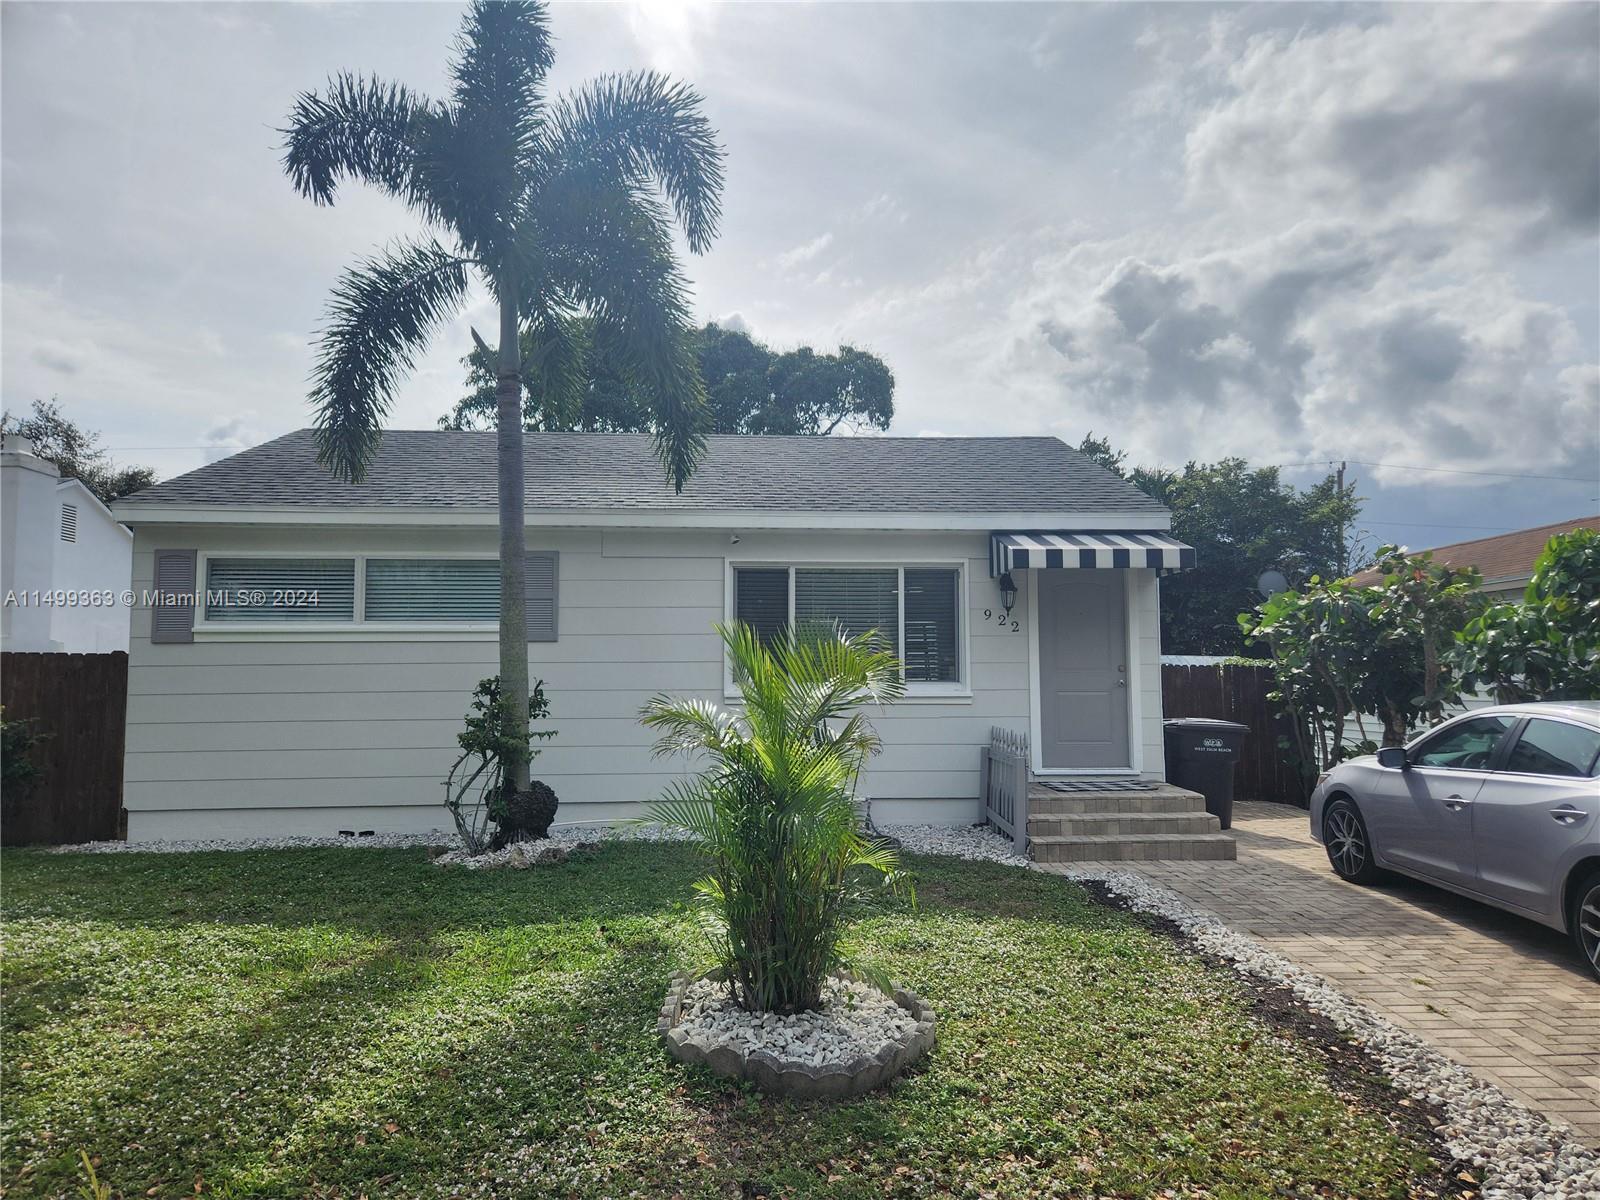 Photo of 922 Upland Rd in West Palm Beach, FL